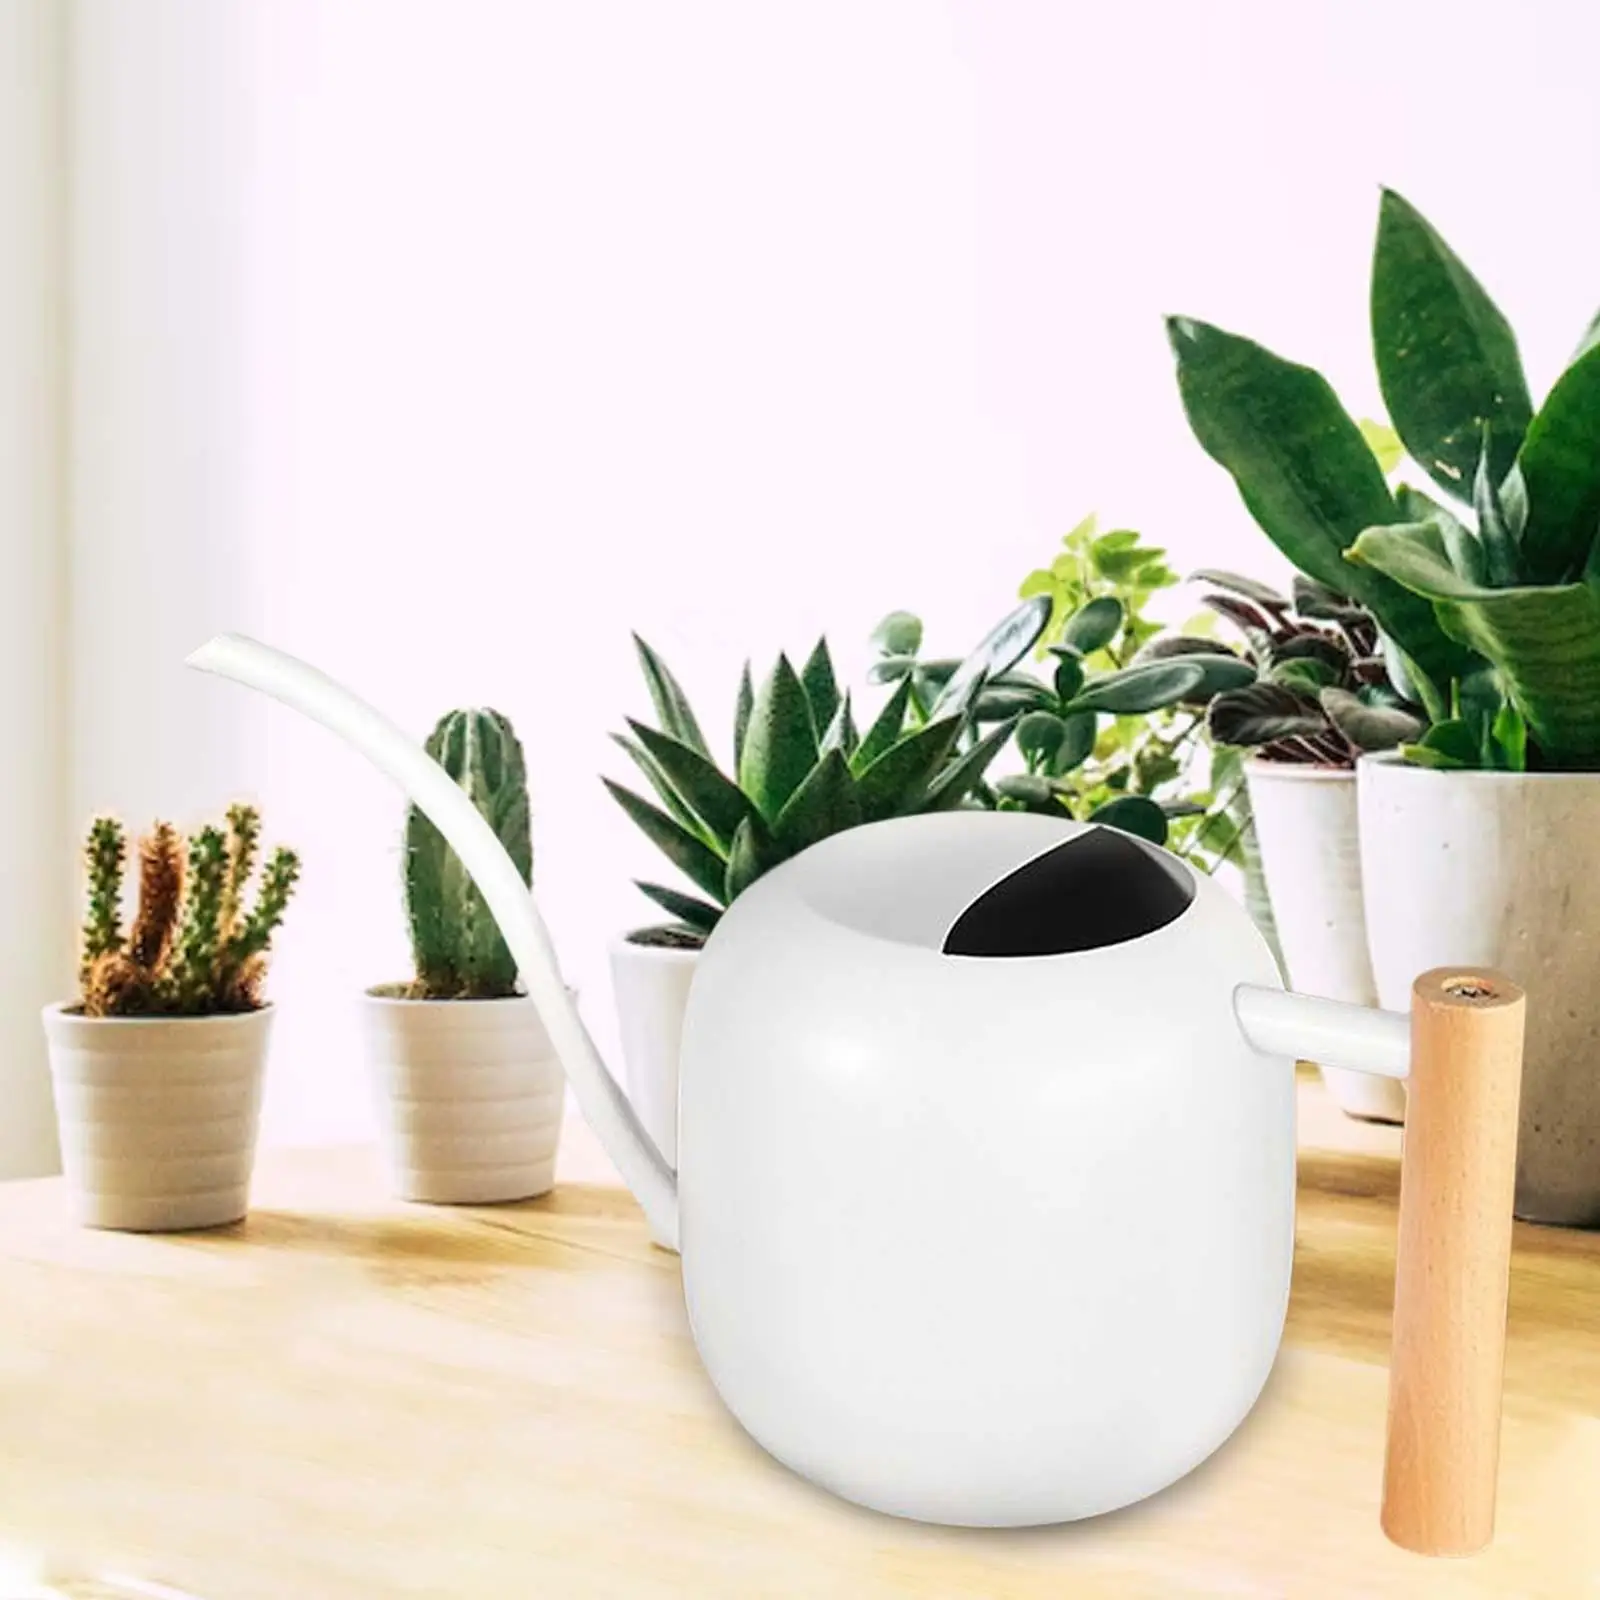 Stainless Steel Watering Can Watering Flower Kettle for Outdoor Flower Decor